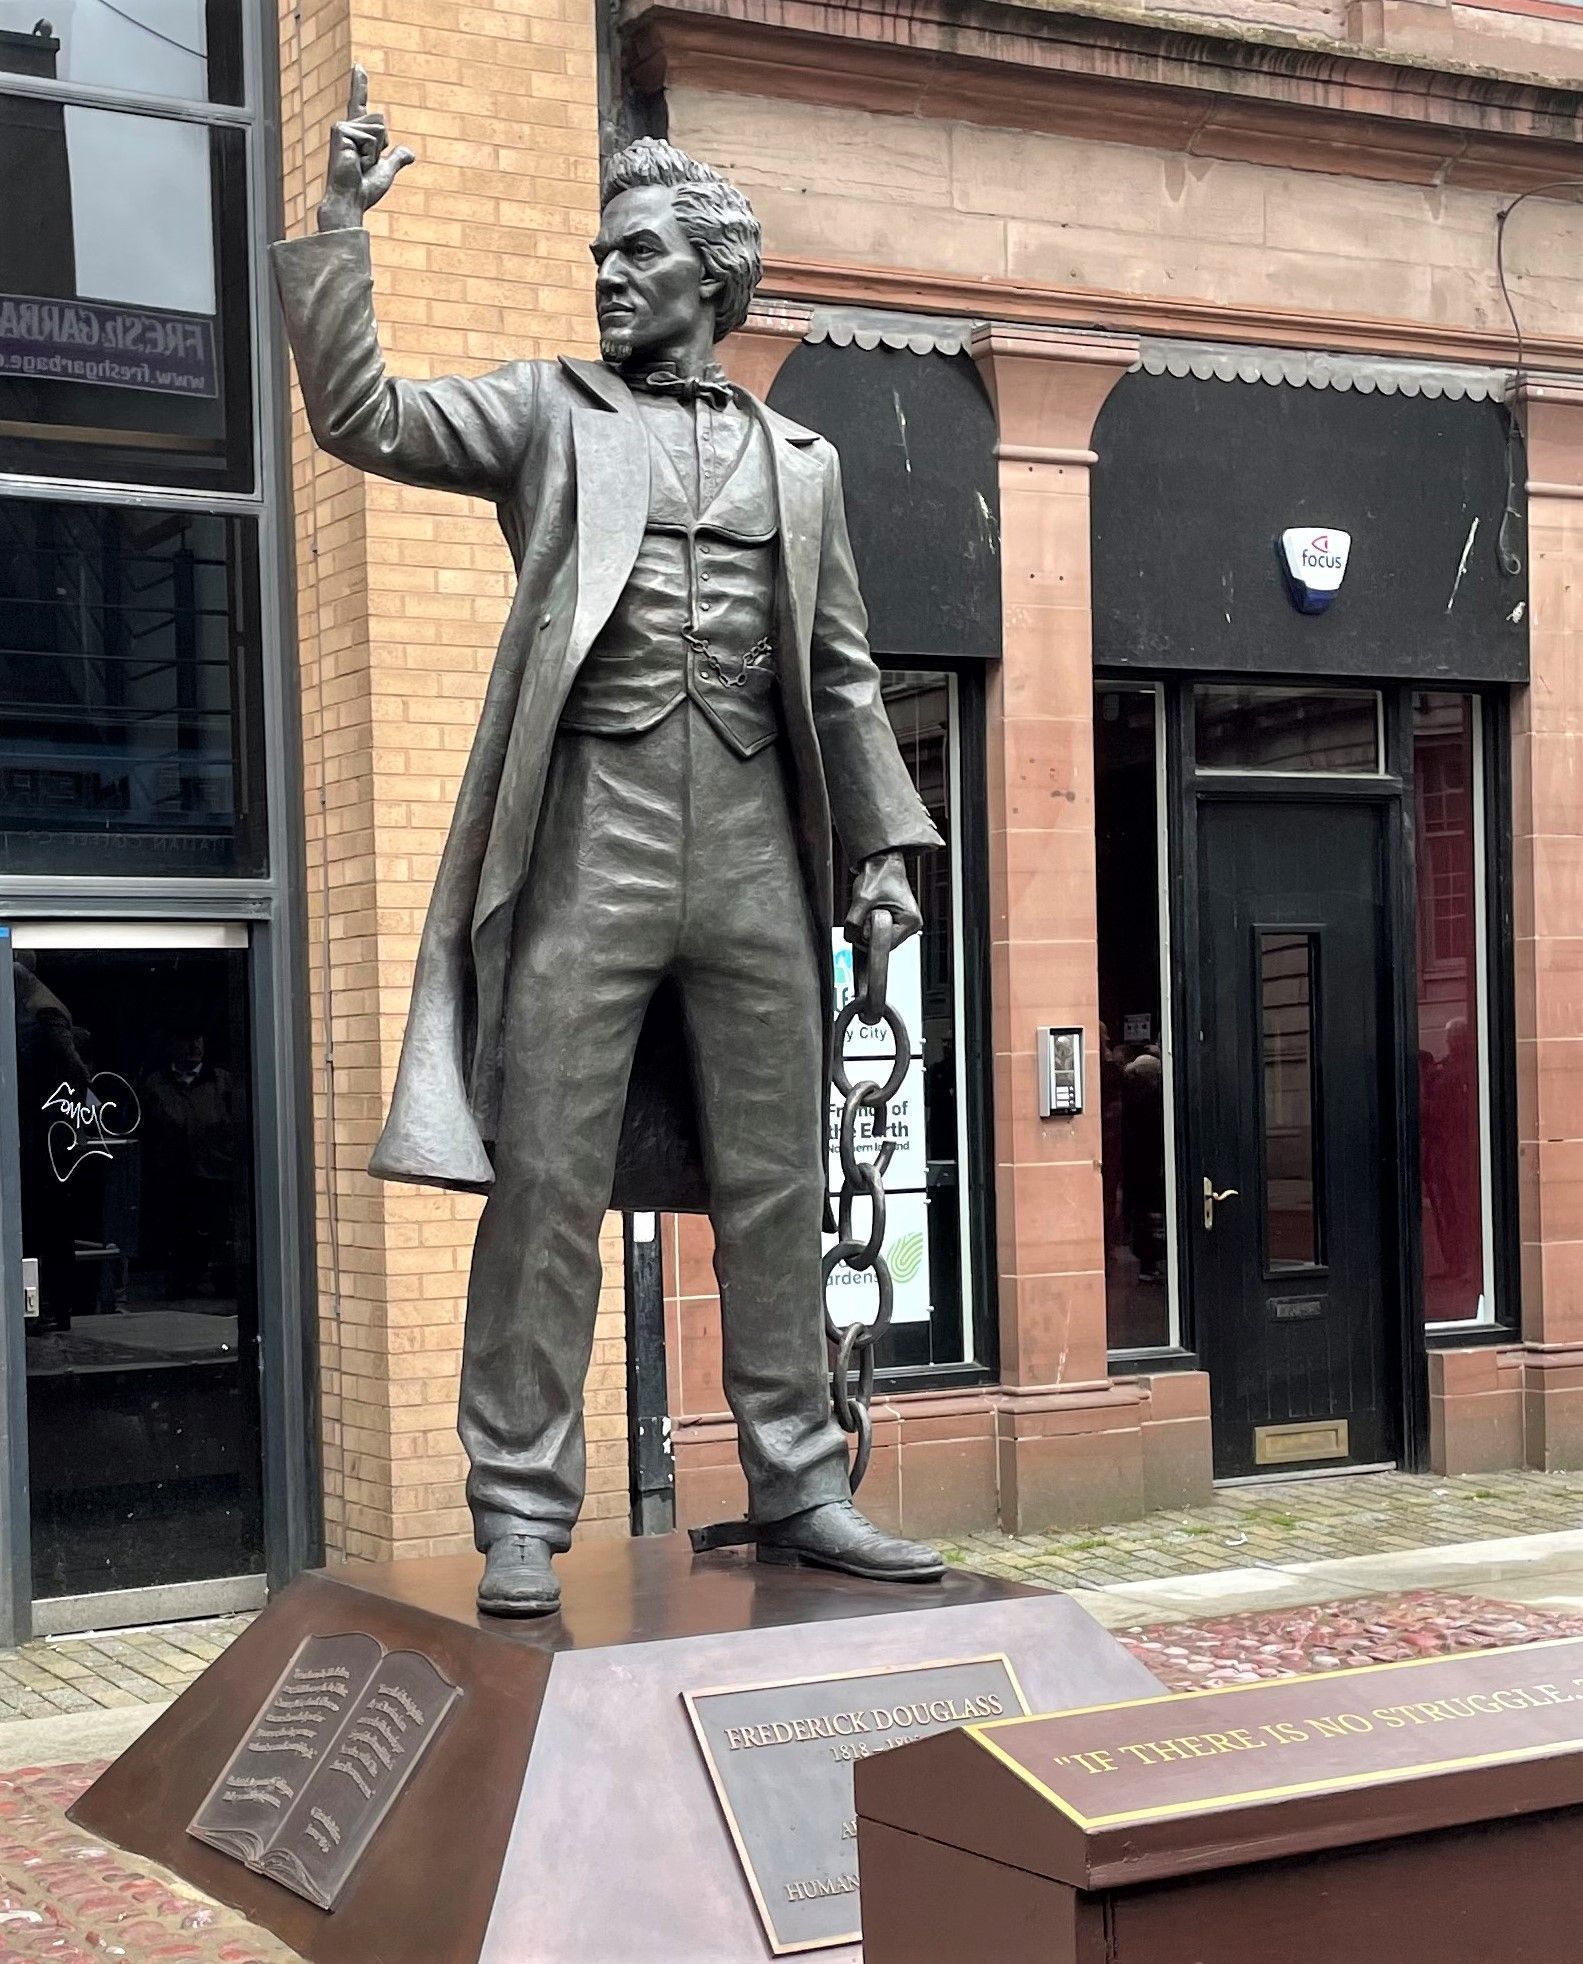 RECOGNITION: The Frederick Douglass statue in Rosemary Street, Belfast